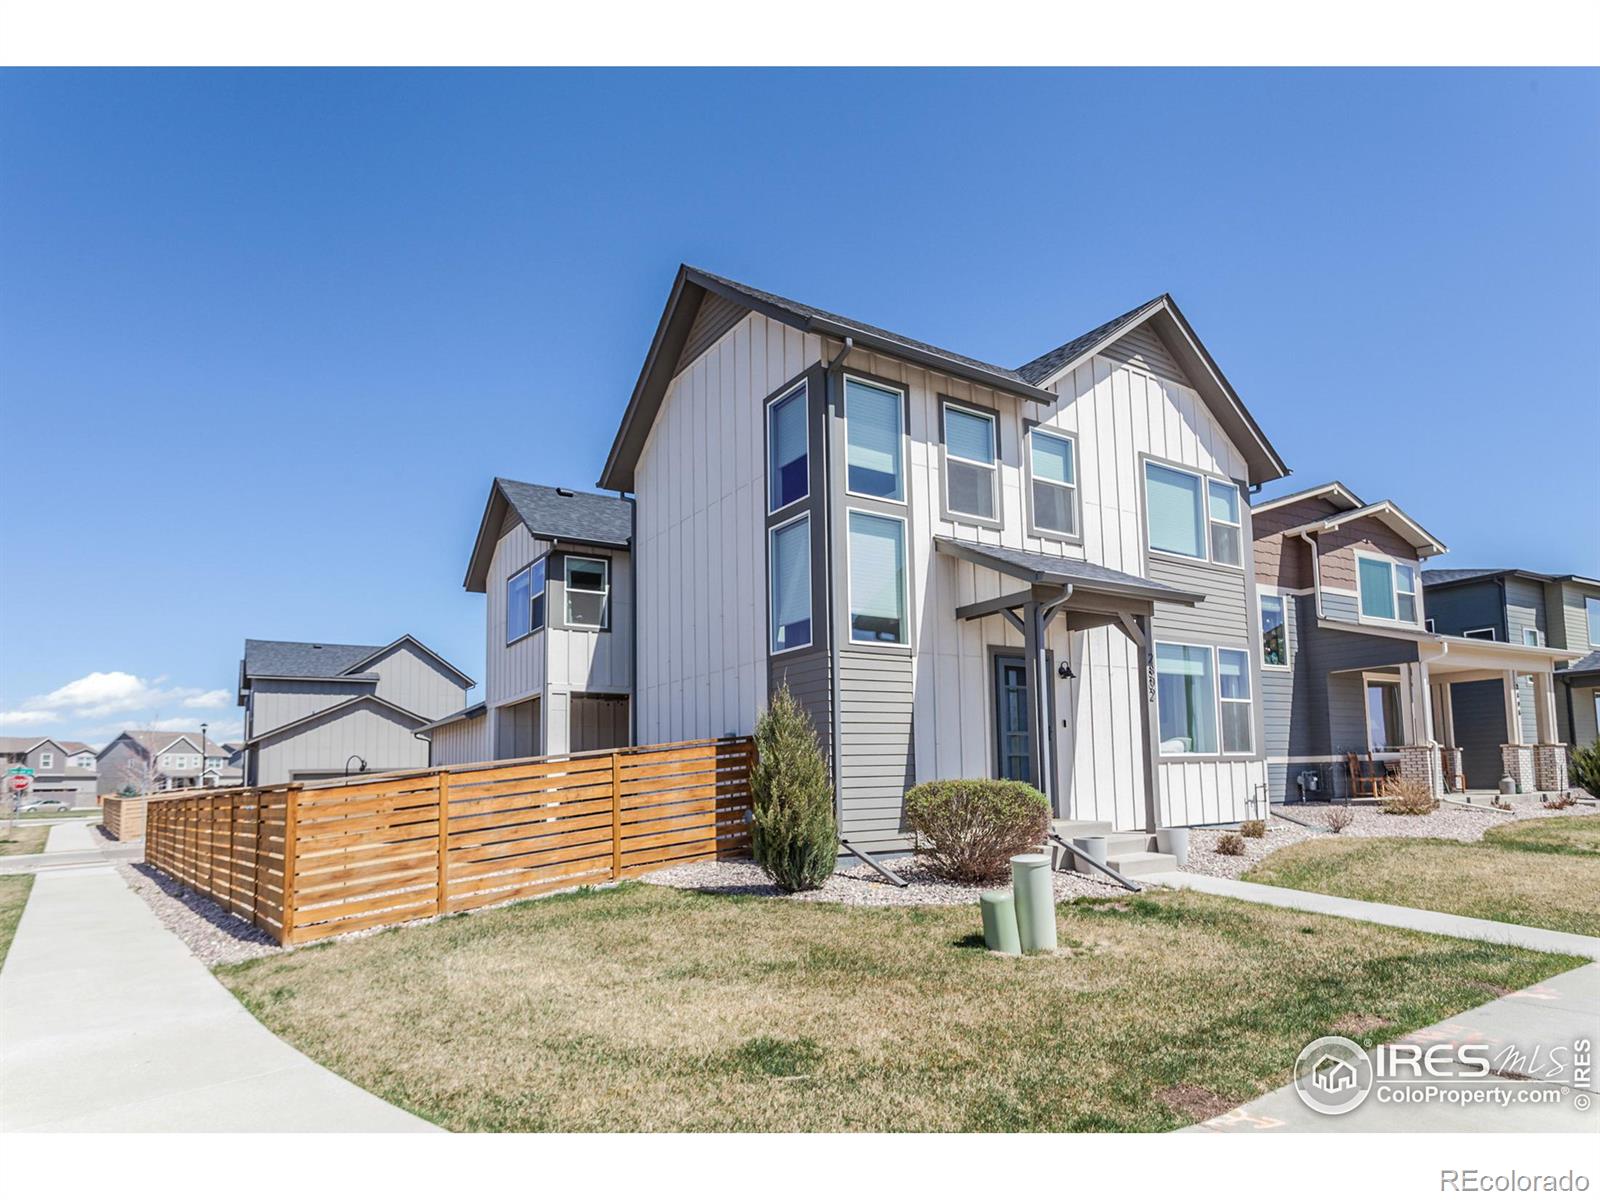 2802  Sykes Drive, fort collins MLS: 4567891007182 Beds: 3 Baths: 3 Price: $635,000